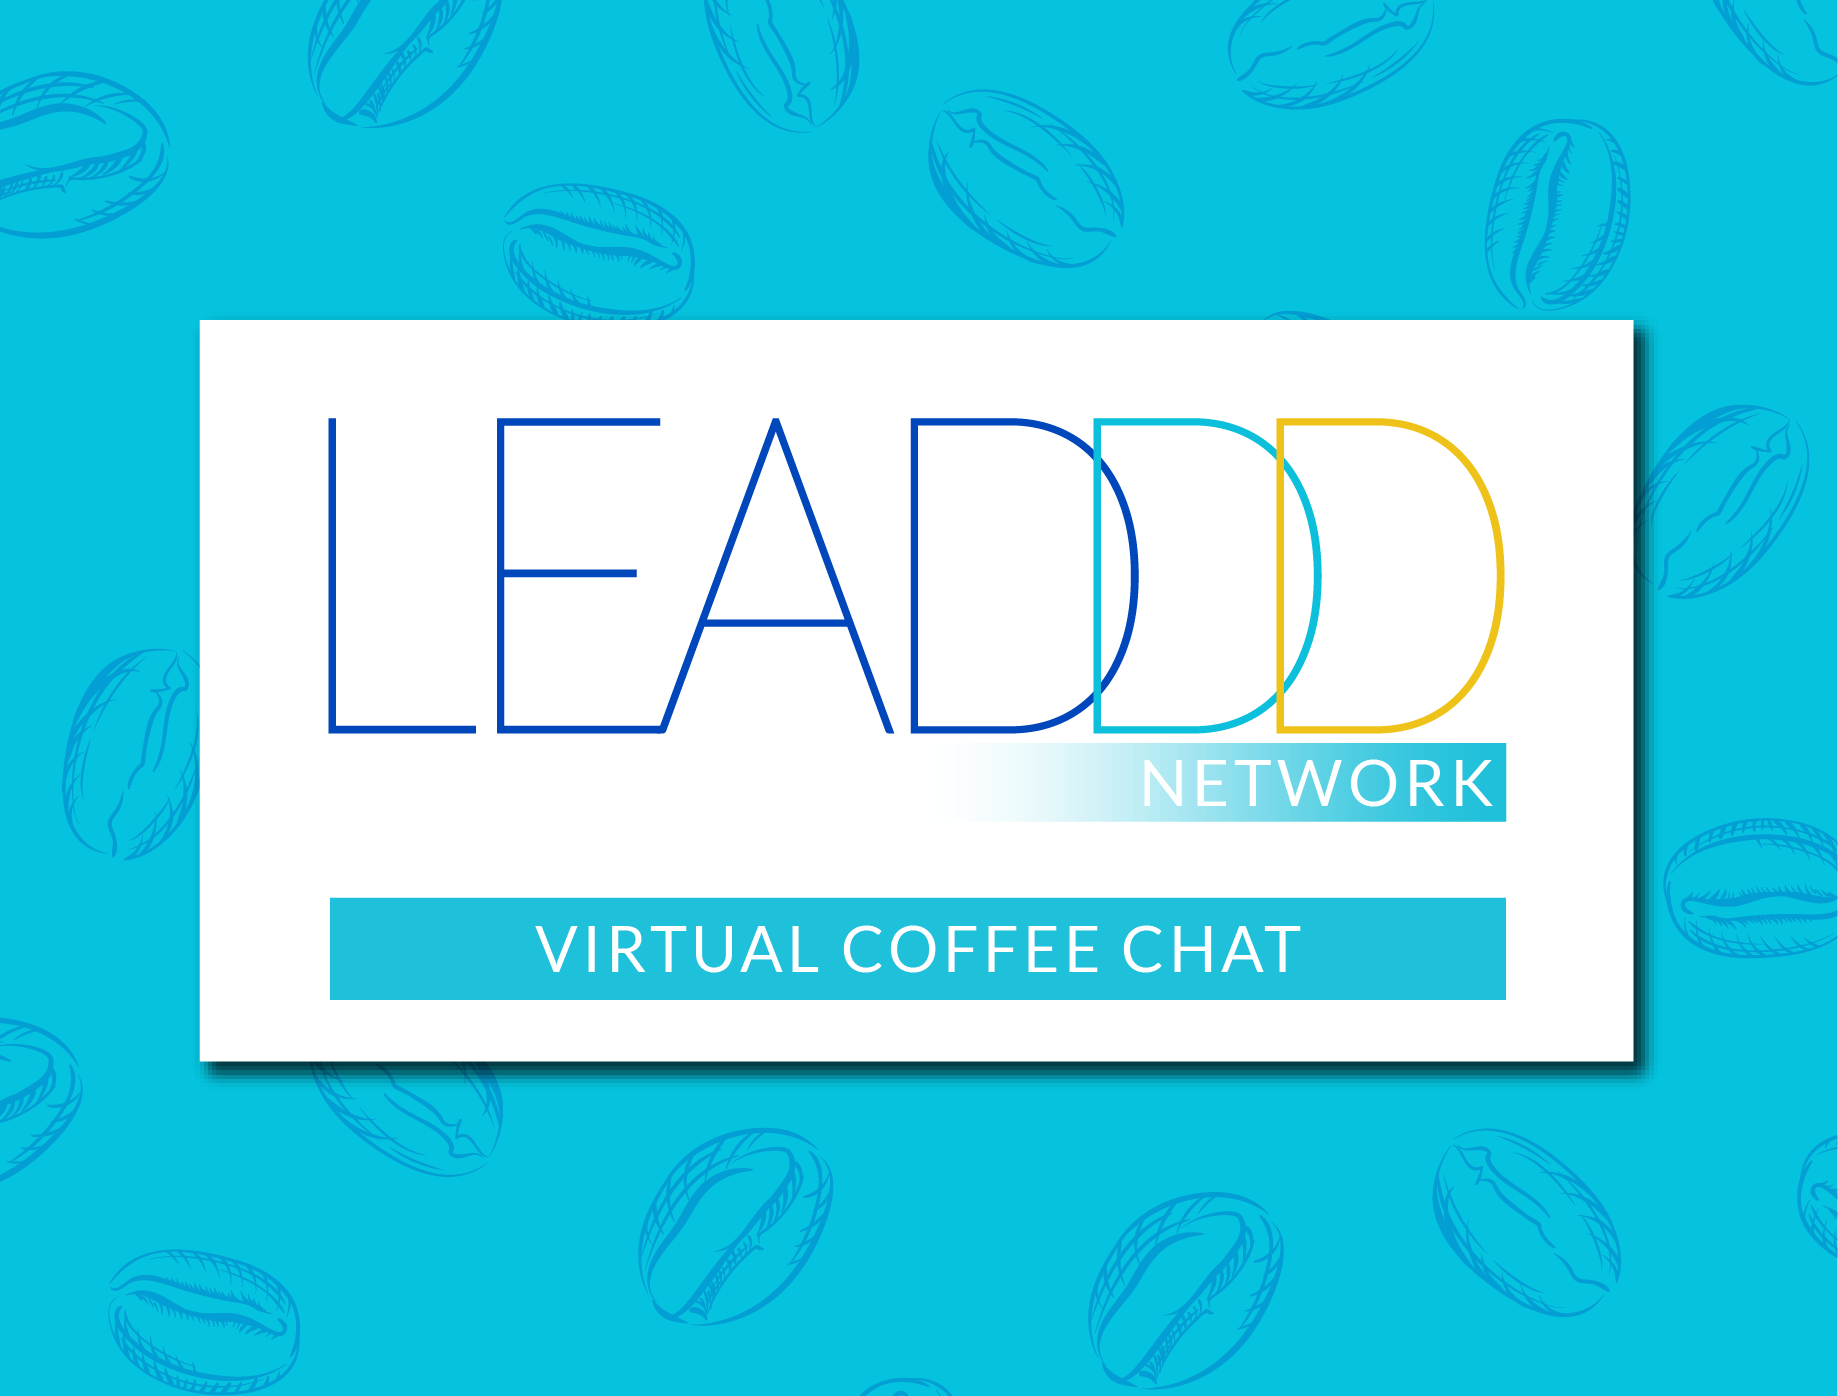 LEADDD Network: August Session